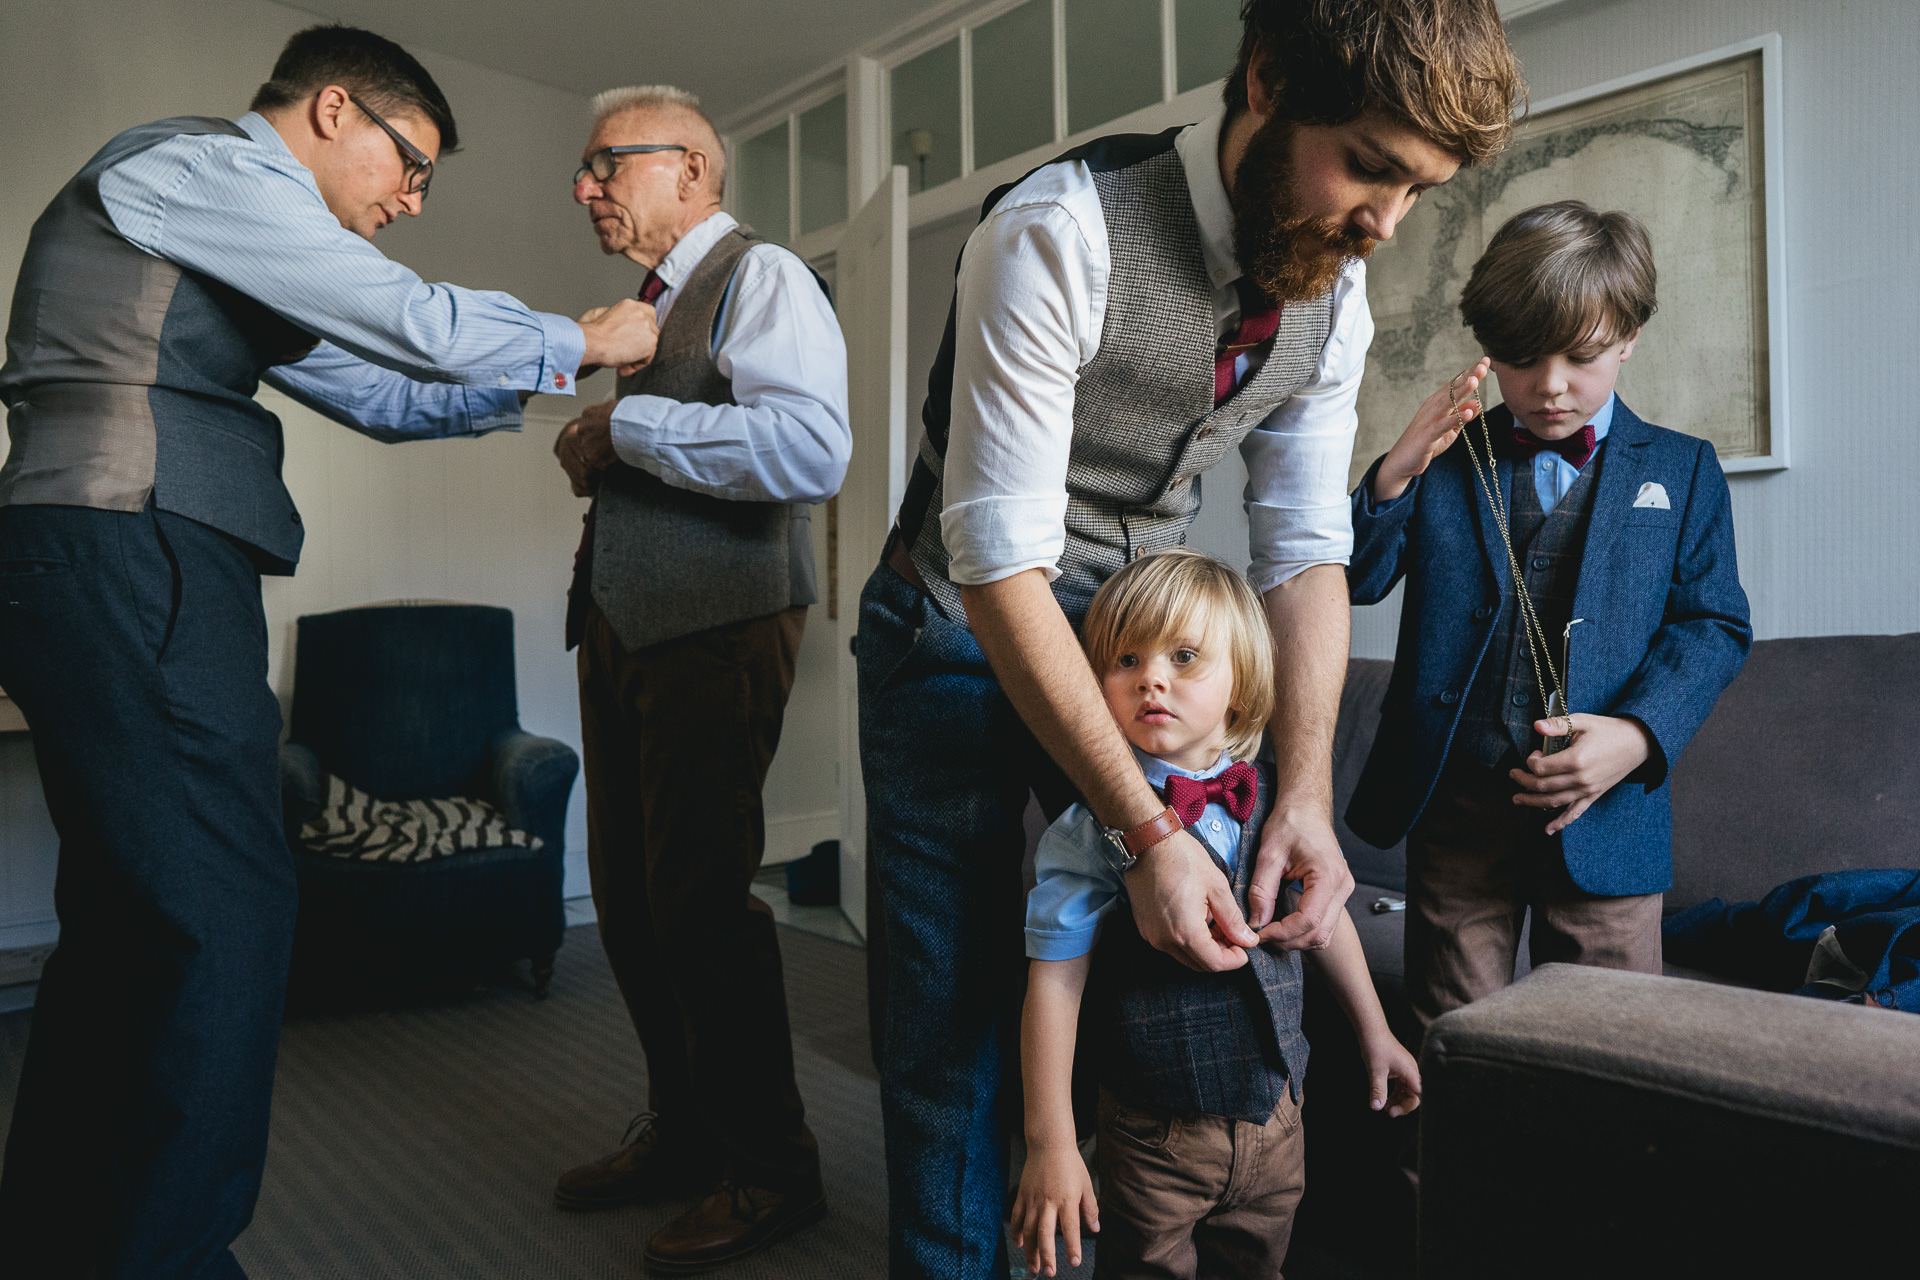 Group of men and boys getting ready for a wedding